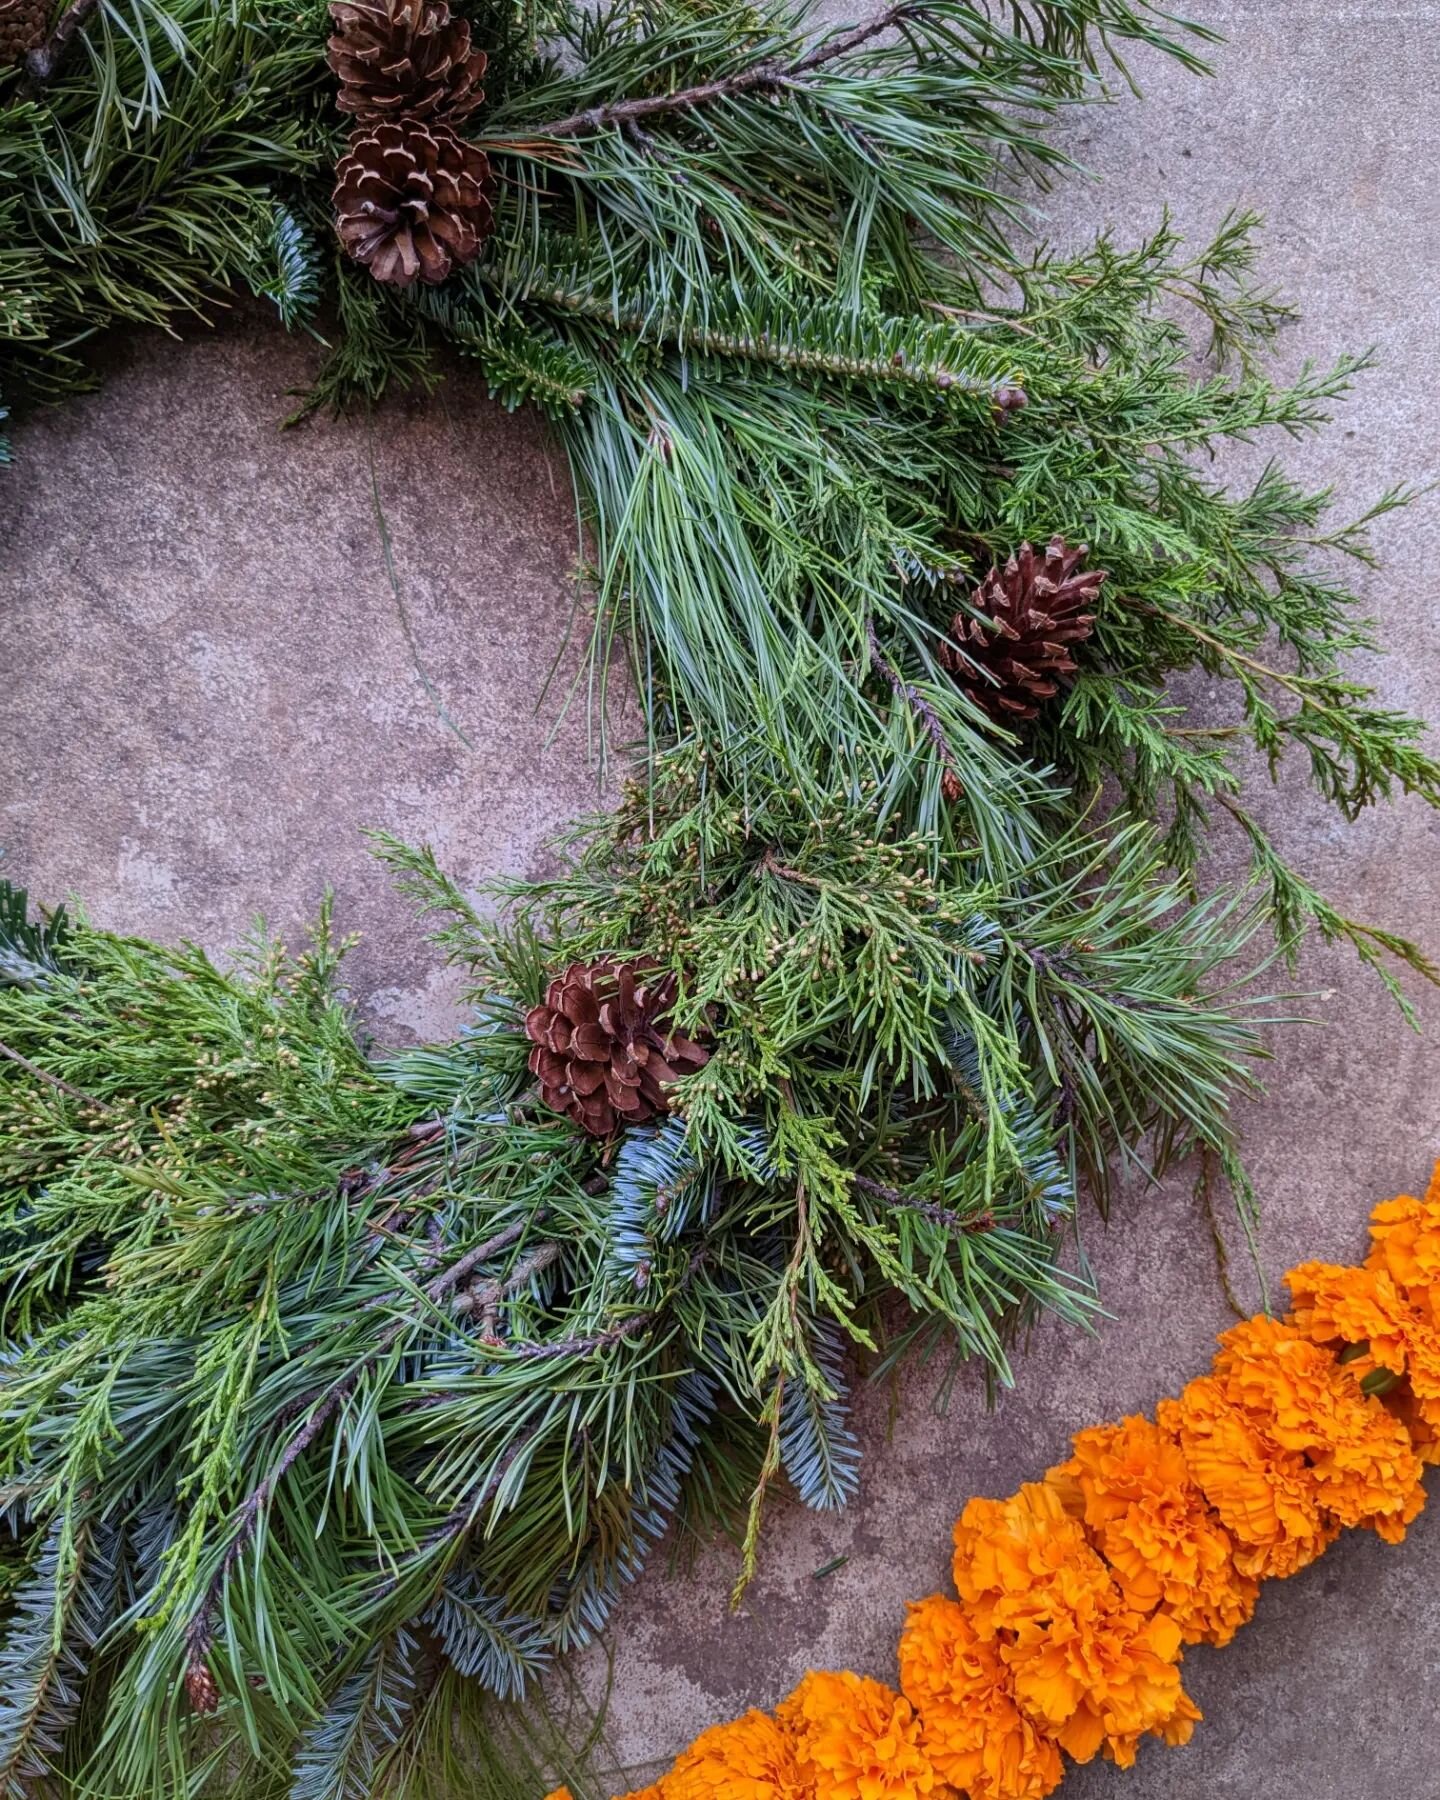 THIS SATURDAY (day after tomorrow)! Come join us @___perfectlovers___ for a small-biz-saturday holiday market. With friends @featureflora @rivtak @ali_is_sewing &amp; more, we'll be there with classic, lush evergreen wreaths and marigold garlands. Th